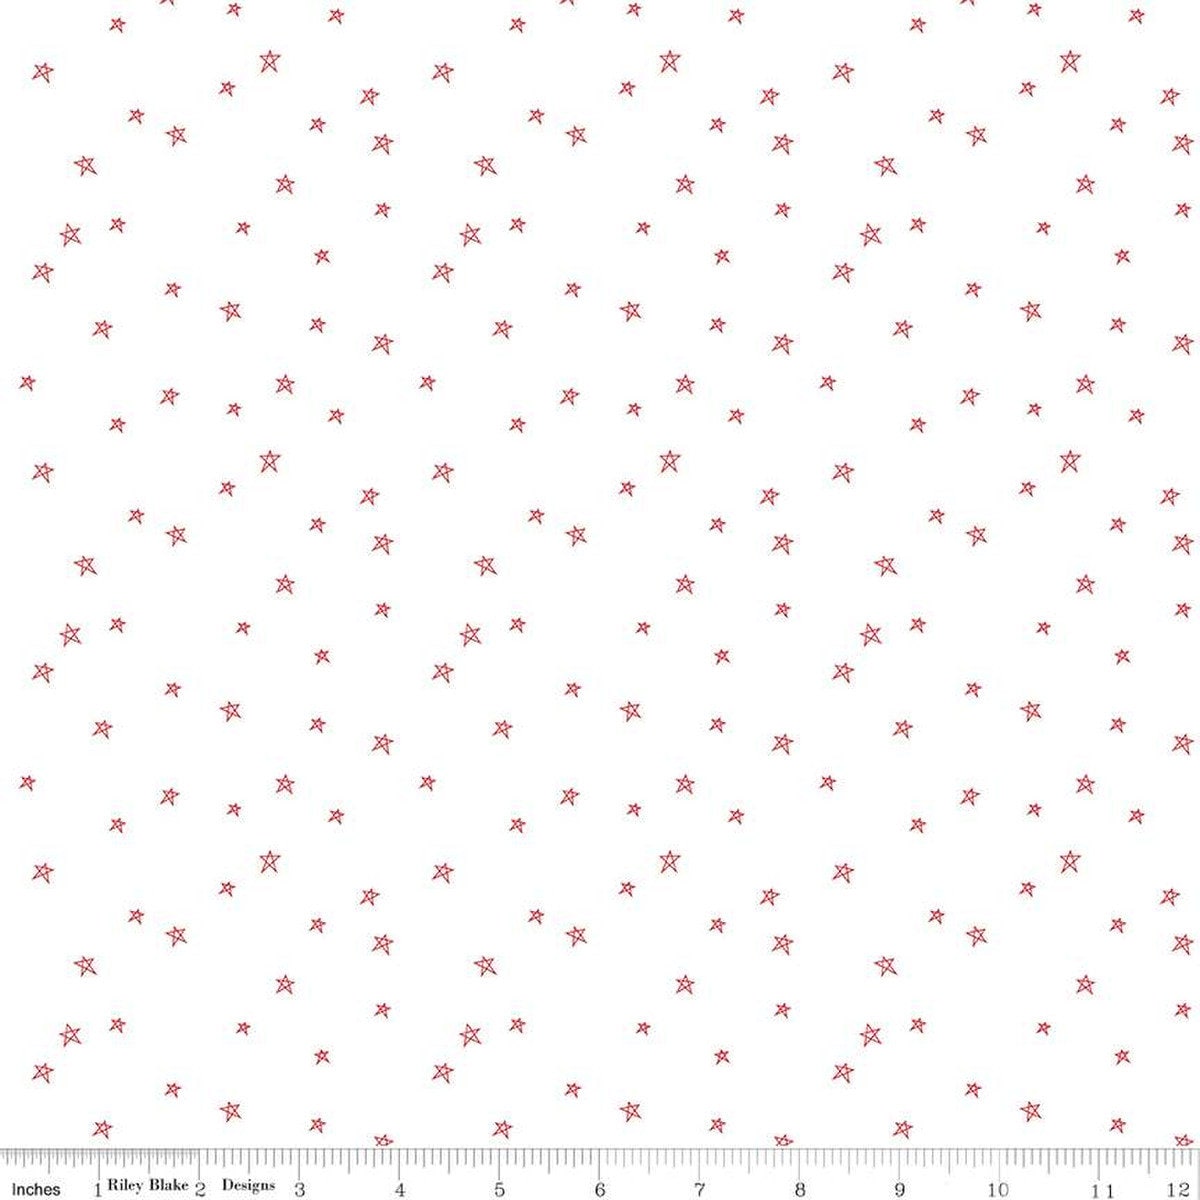 Bee Plaids - Farmhouse Star Cayenne Fabric, Riley Blake C12039 Cayenne, Red Outlined Star Quilt Background Fabric, Lori Holt, By the Yard